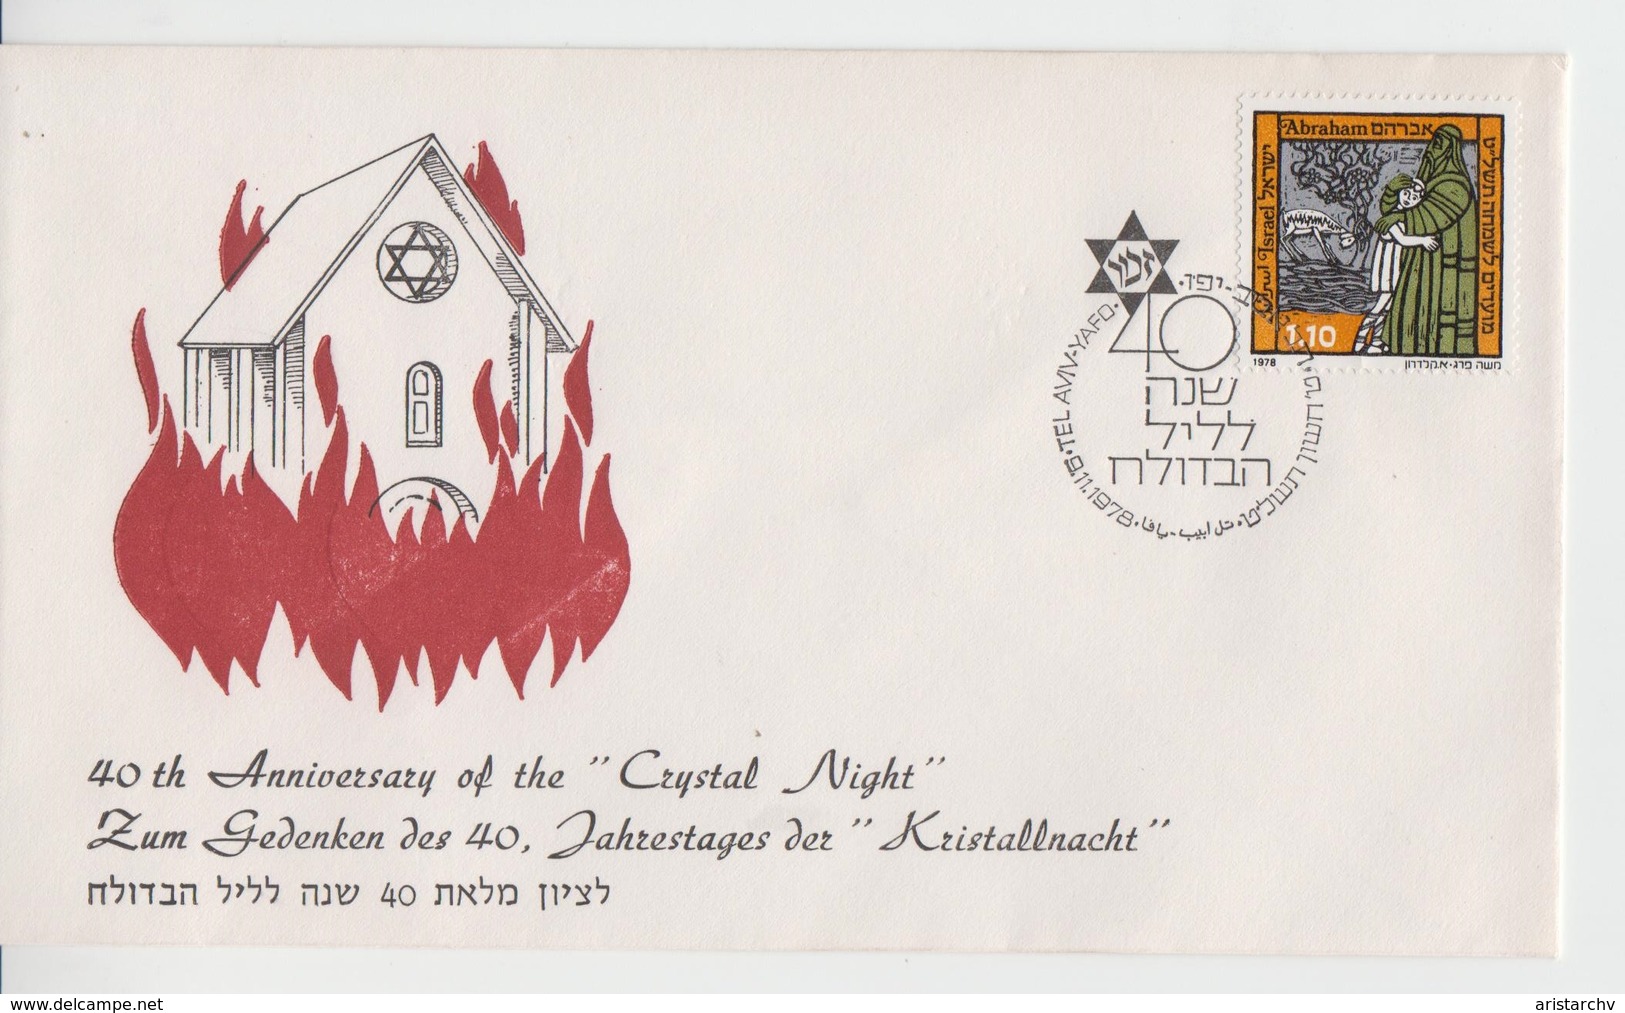 ISRAEL 1978 40 ANNIVERSARY OF THE CRYSTAL NIGHT KRISTALLNACHT HOLOCAUST COVER - Postage Due